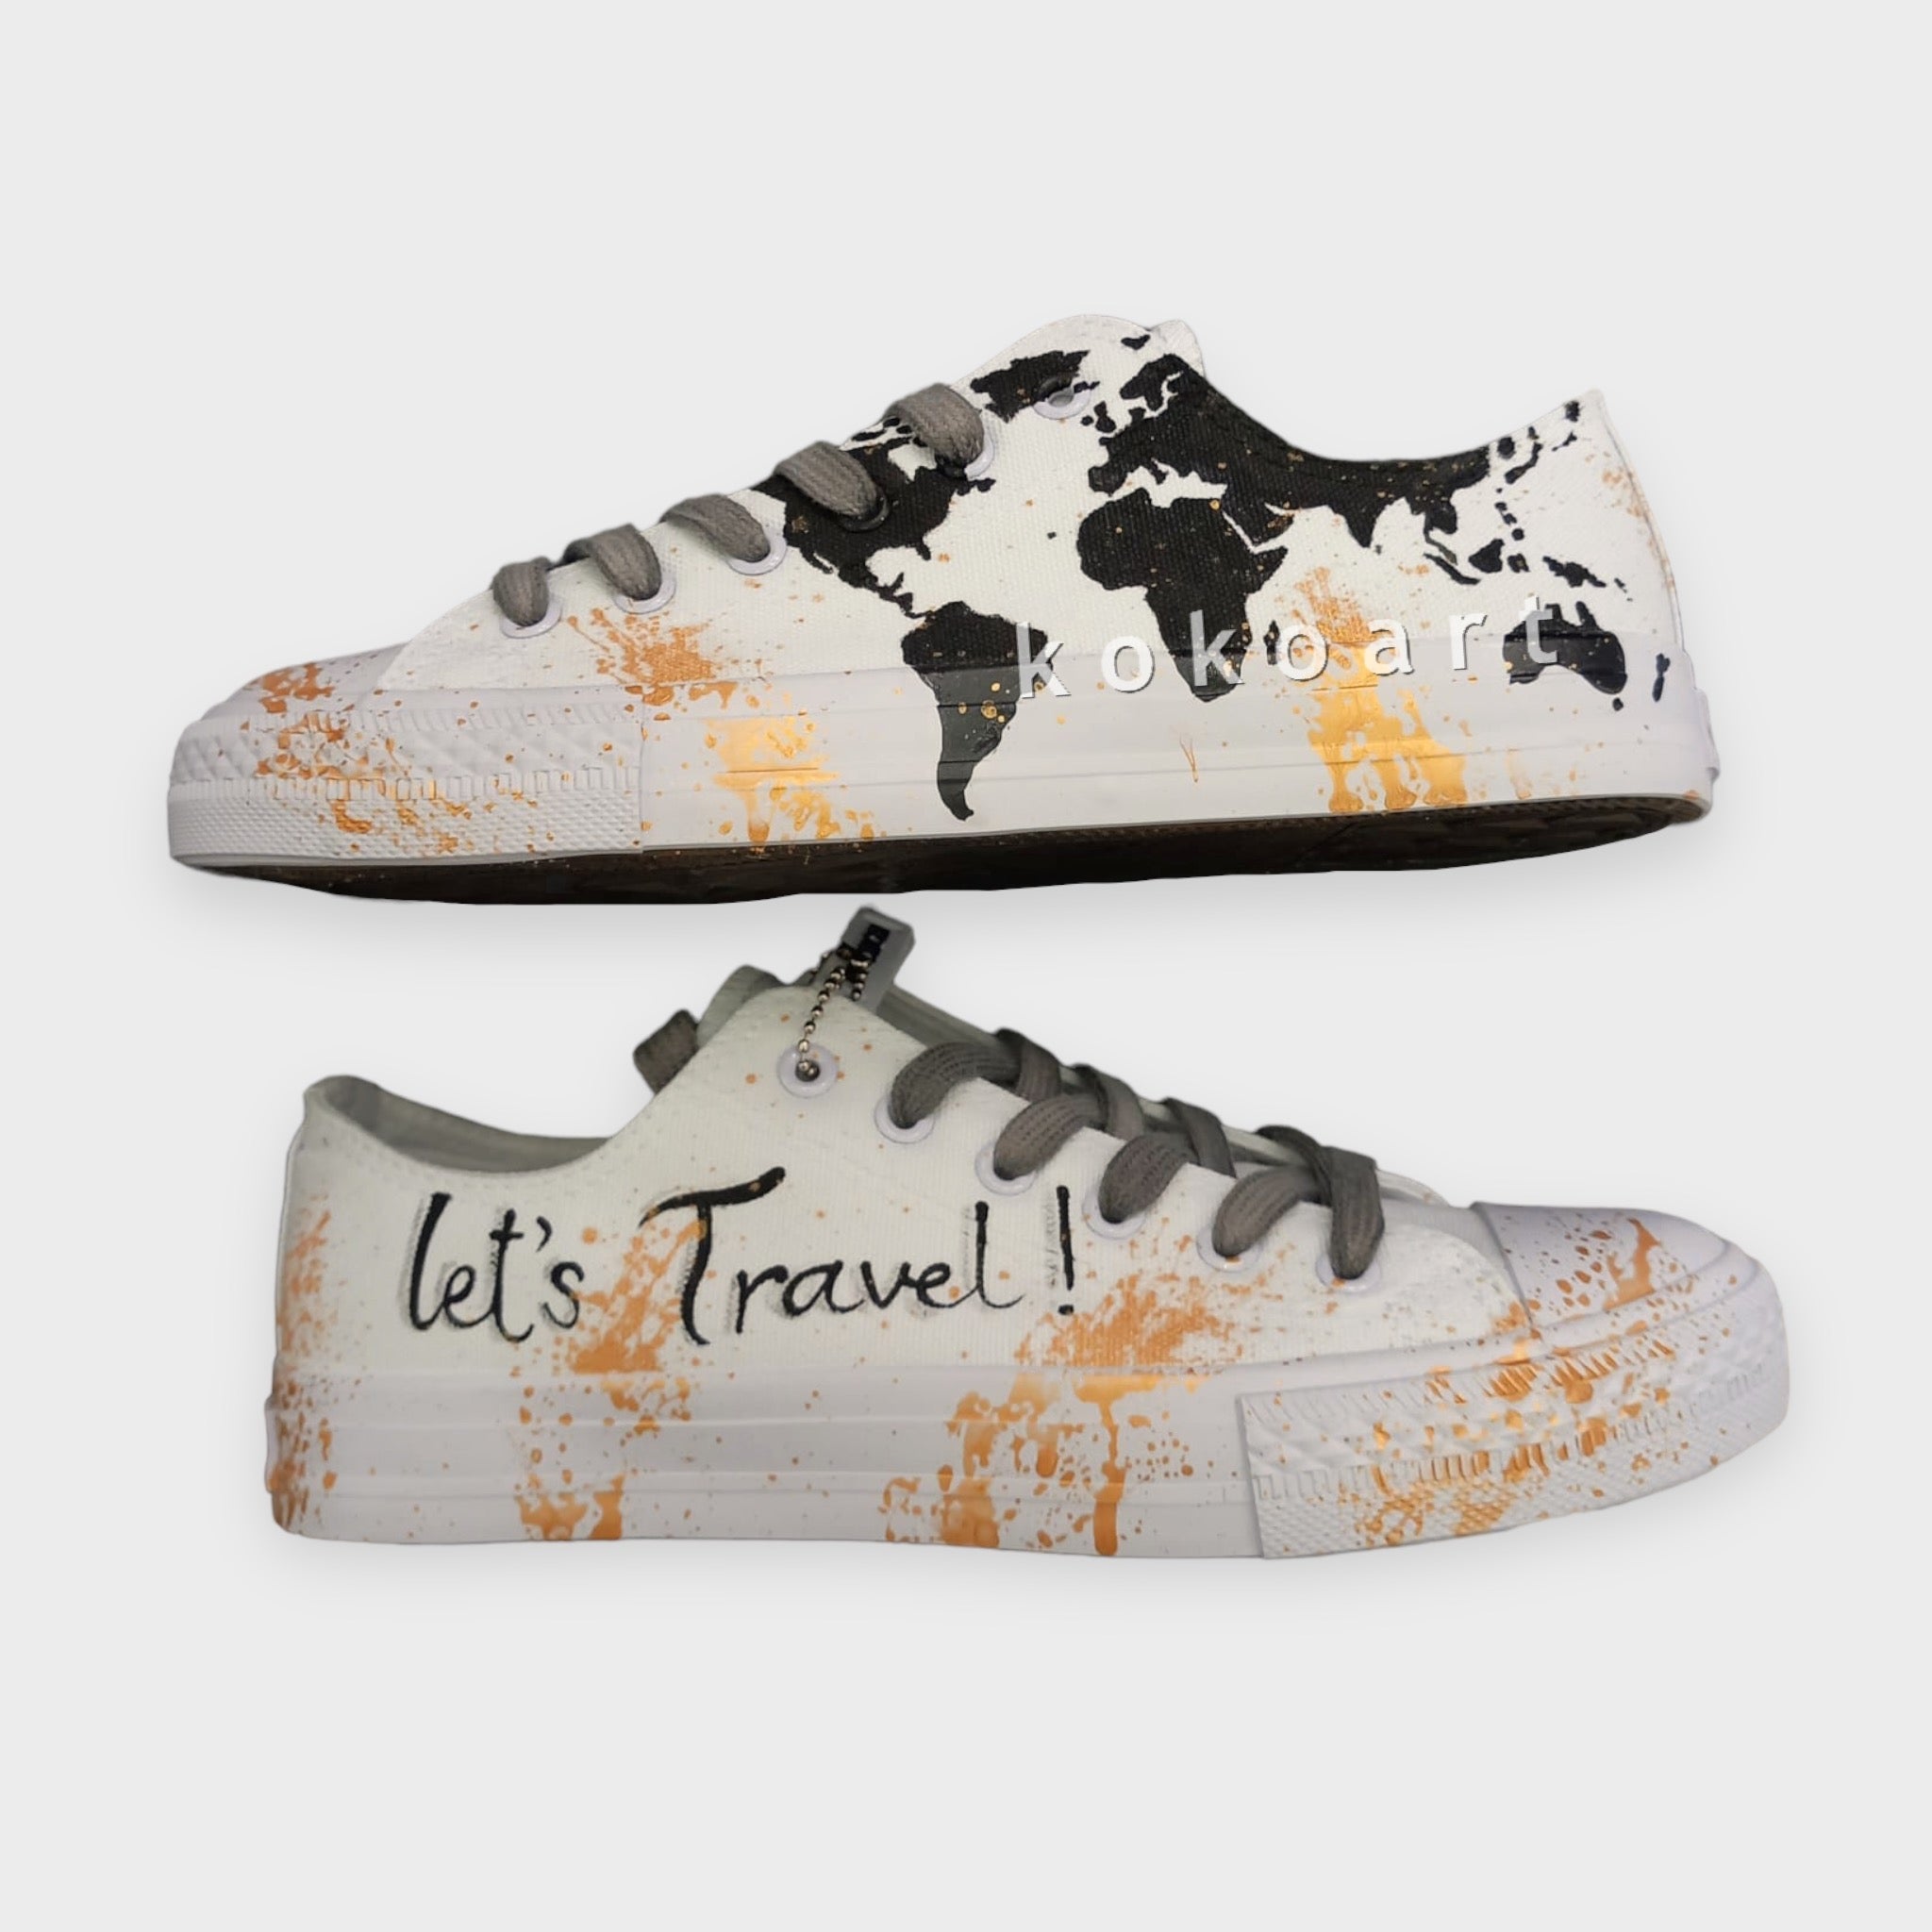 Let's Travel Hand Painted Shoes